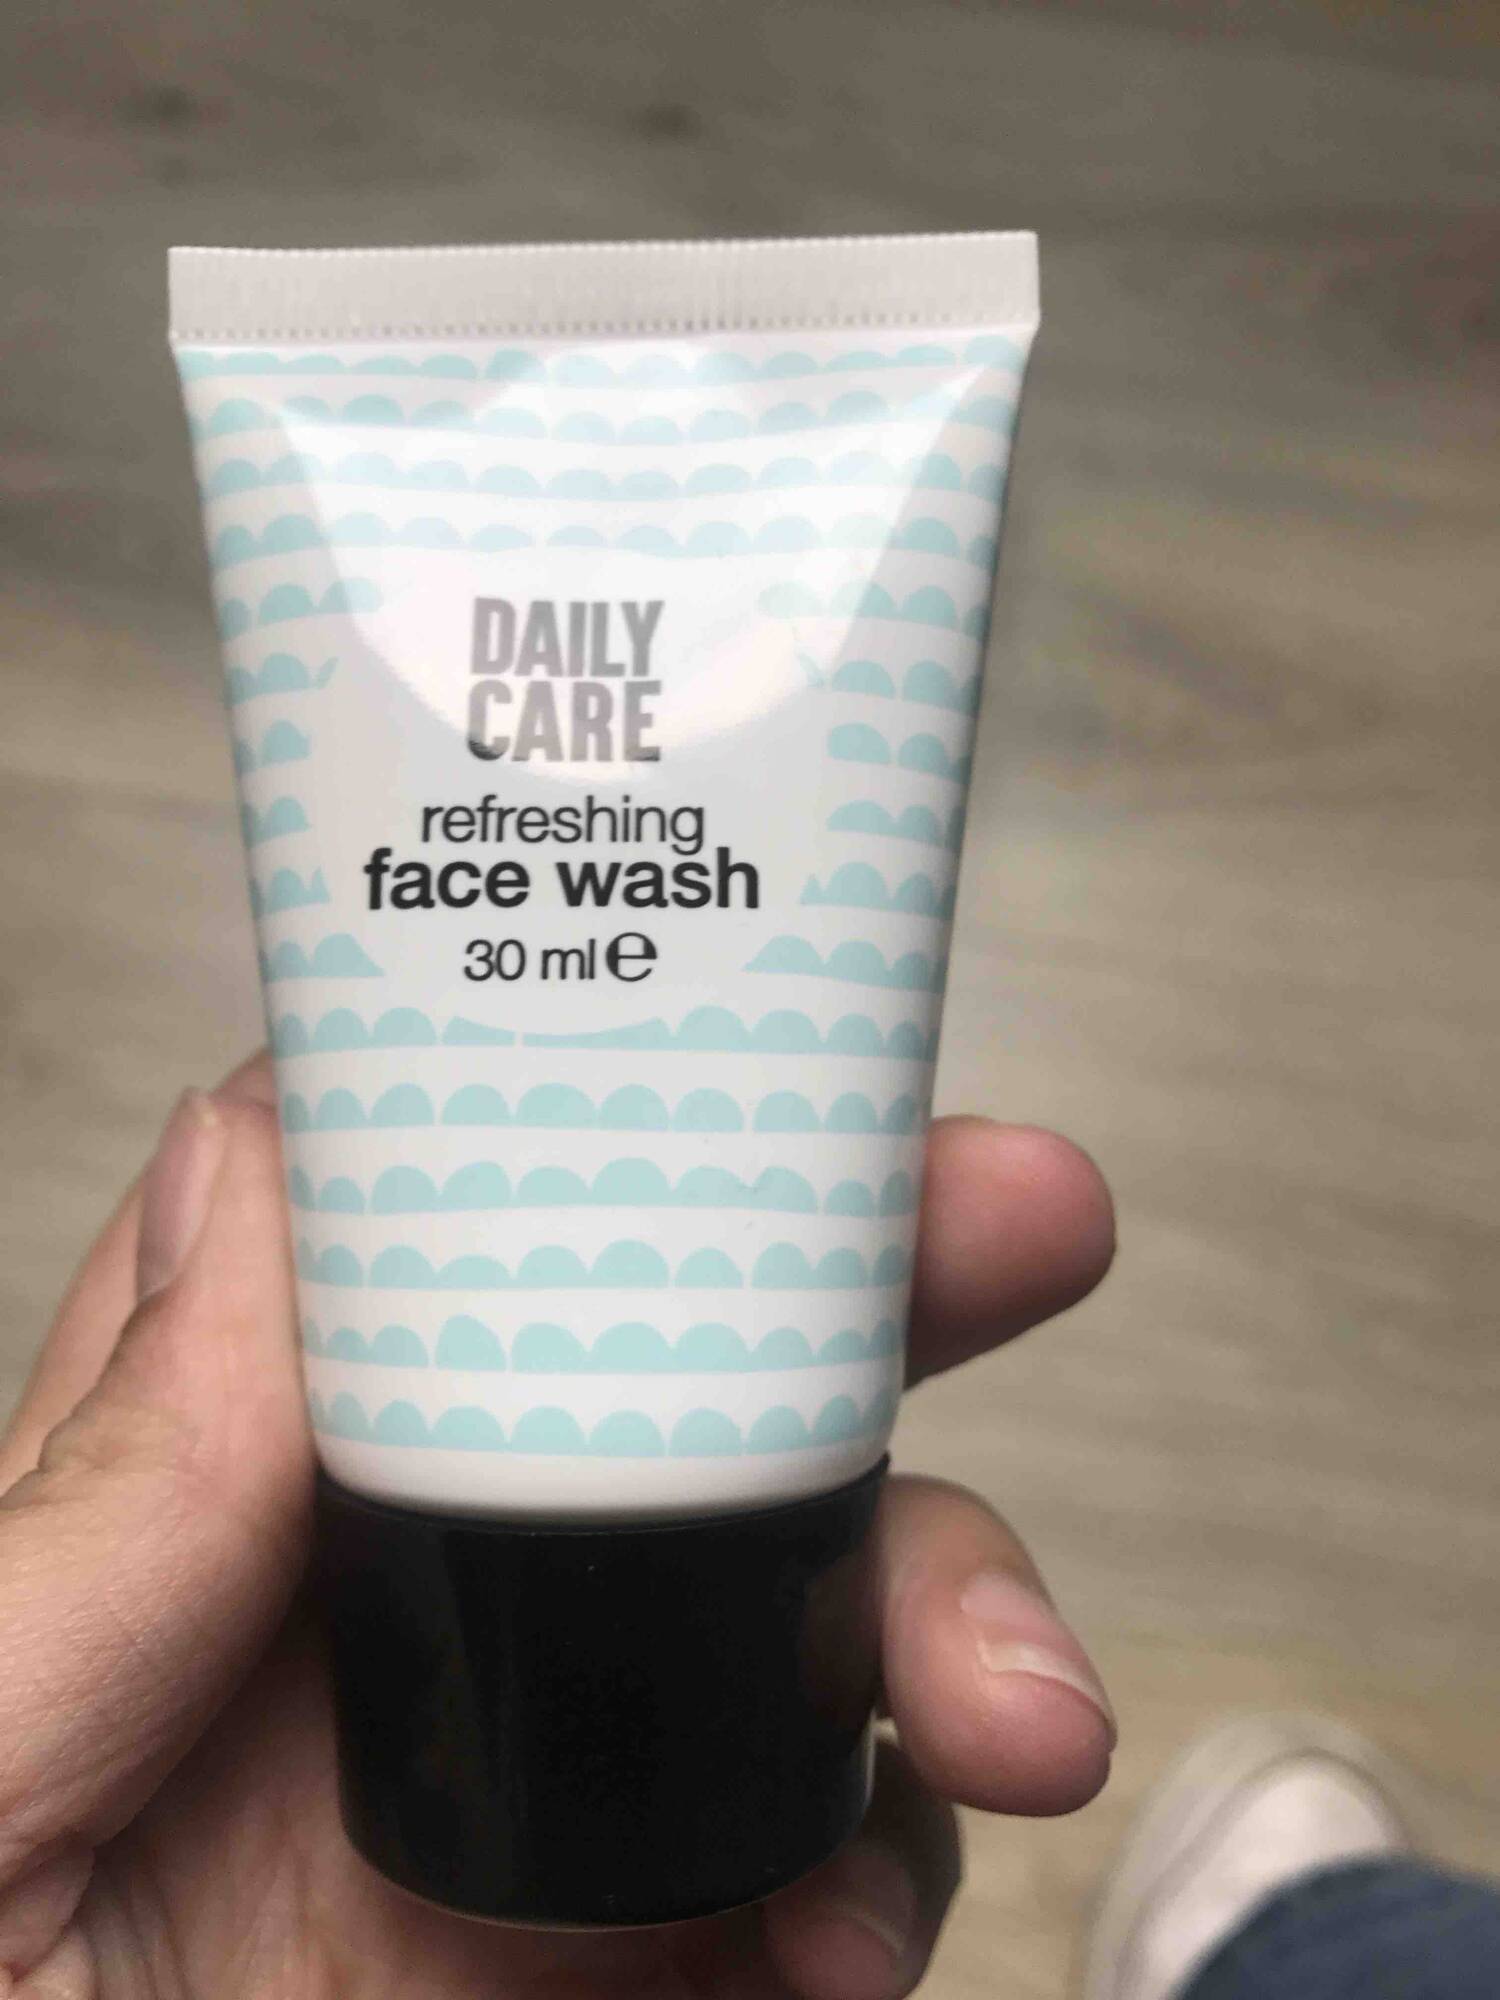 MAXBRANDS - Daily care - Refreshing face wash